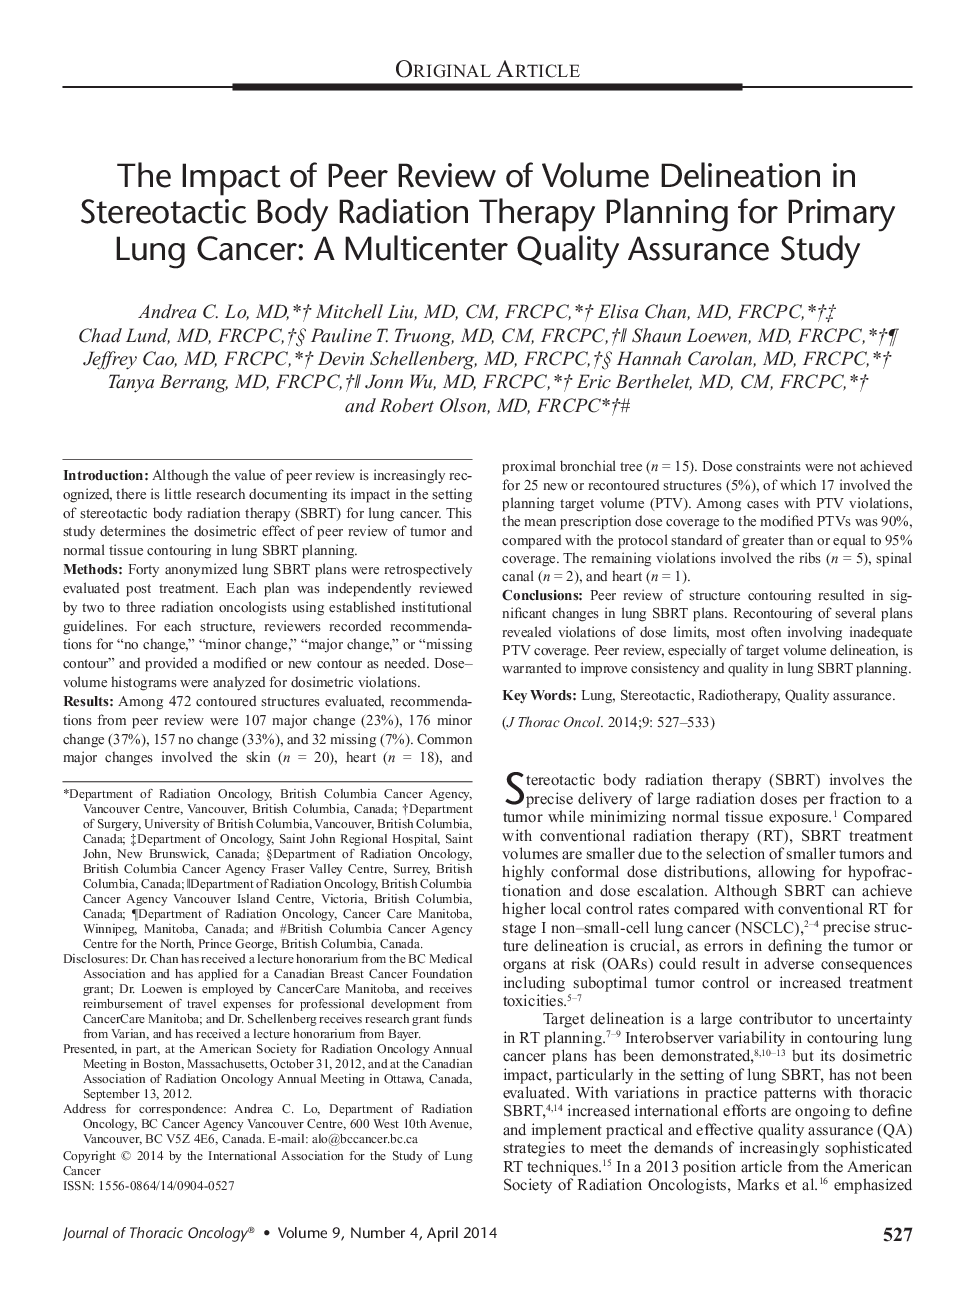 The Impact of Peer Review of Volume Delineation in Stereotactic Body Radiation Therapy Planning for Primary Lung Cancer: A Multicenter Quality Assurance Study 